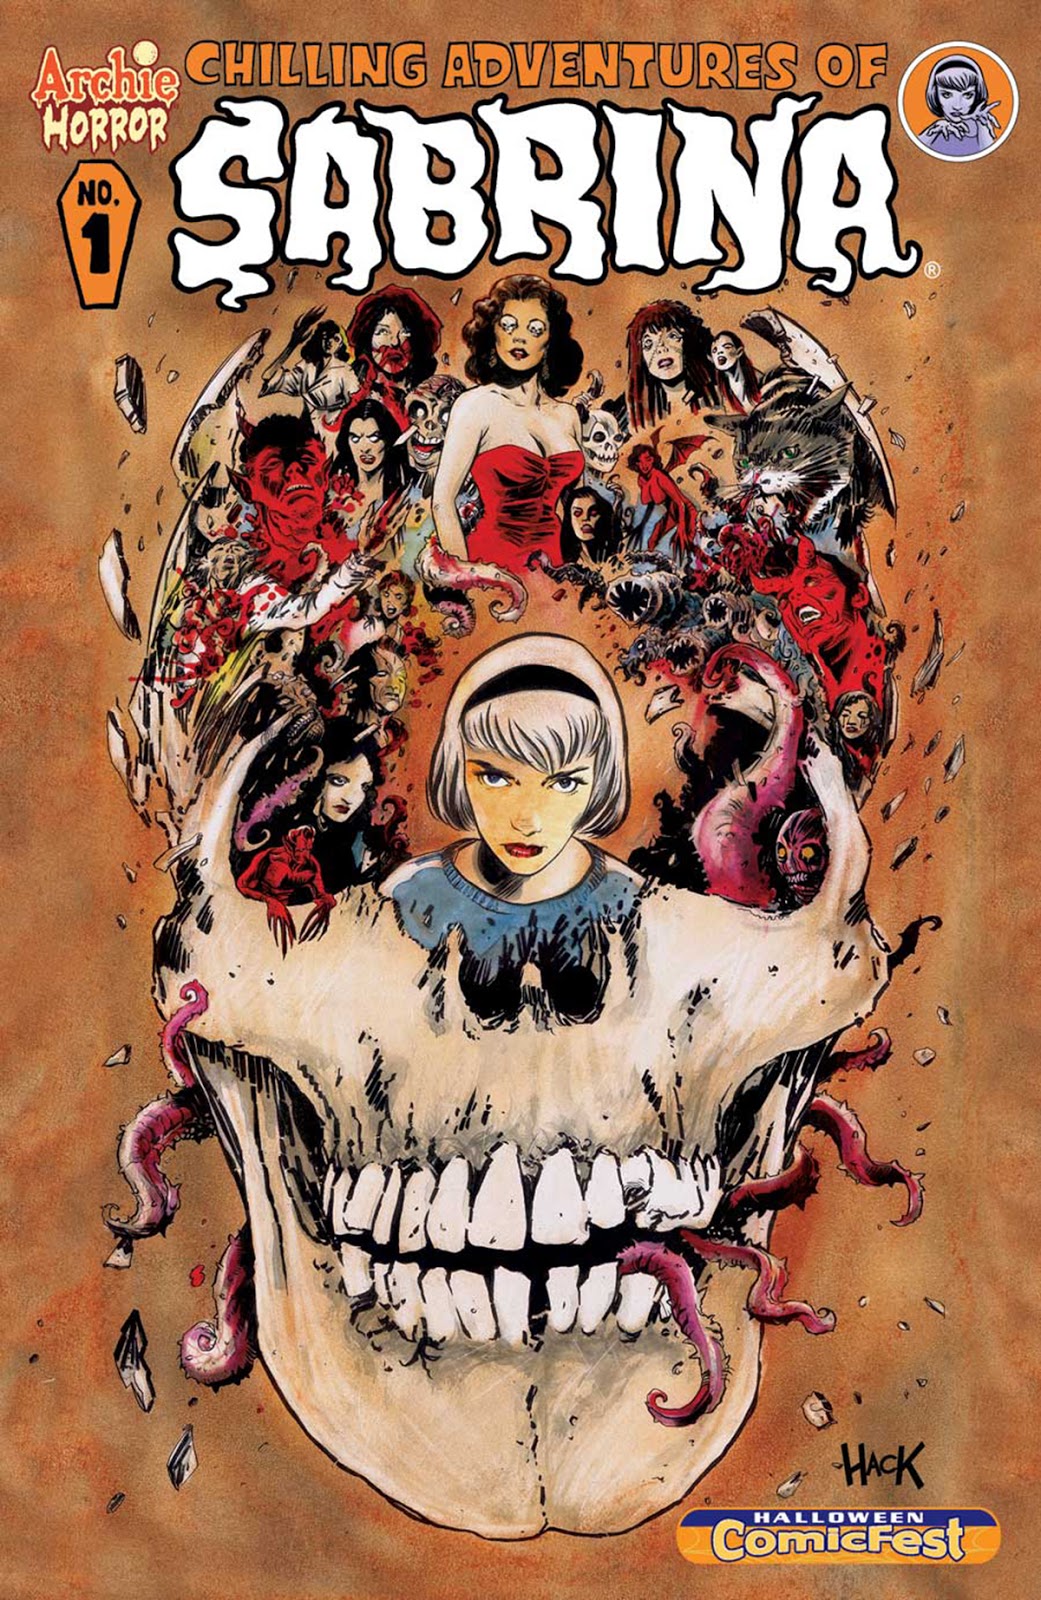 Chilling adventures of Sabrina comic book Archie Horror